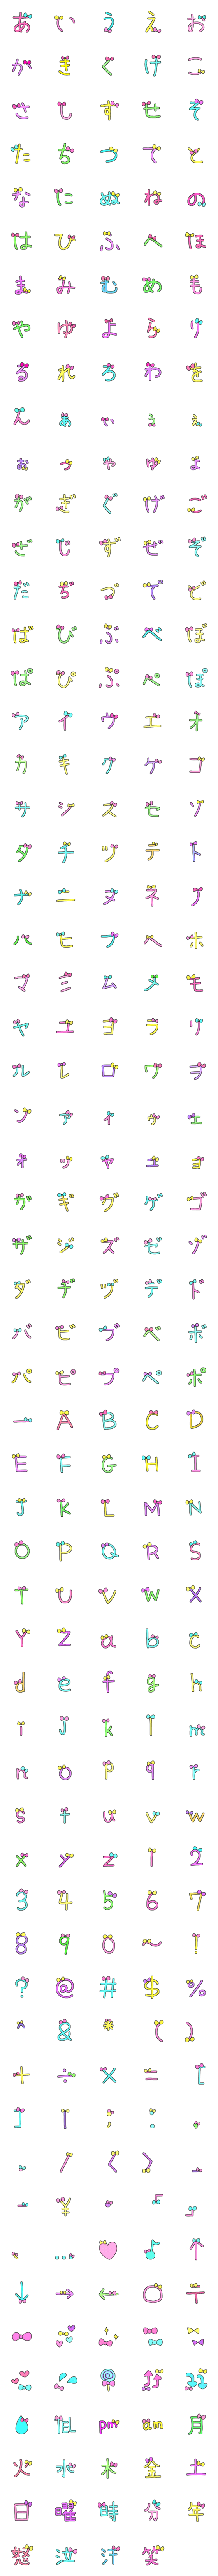 [LINE絵文字]リボン文字の画像一覧